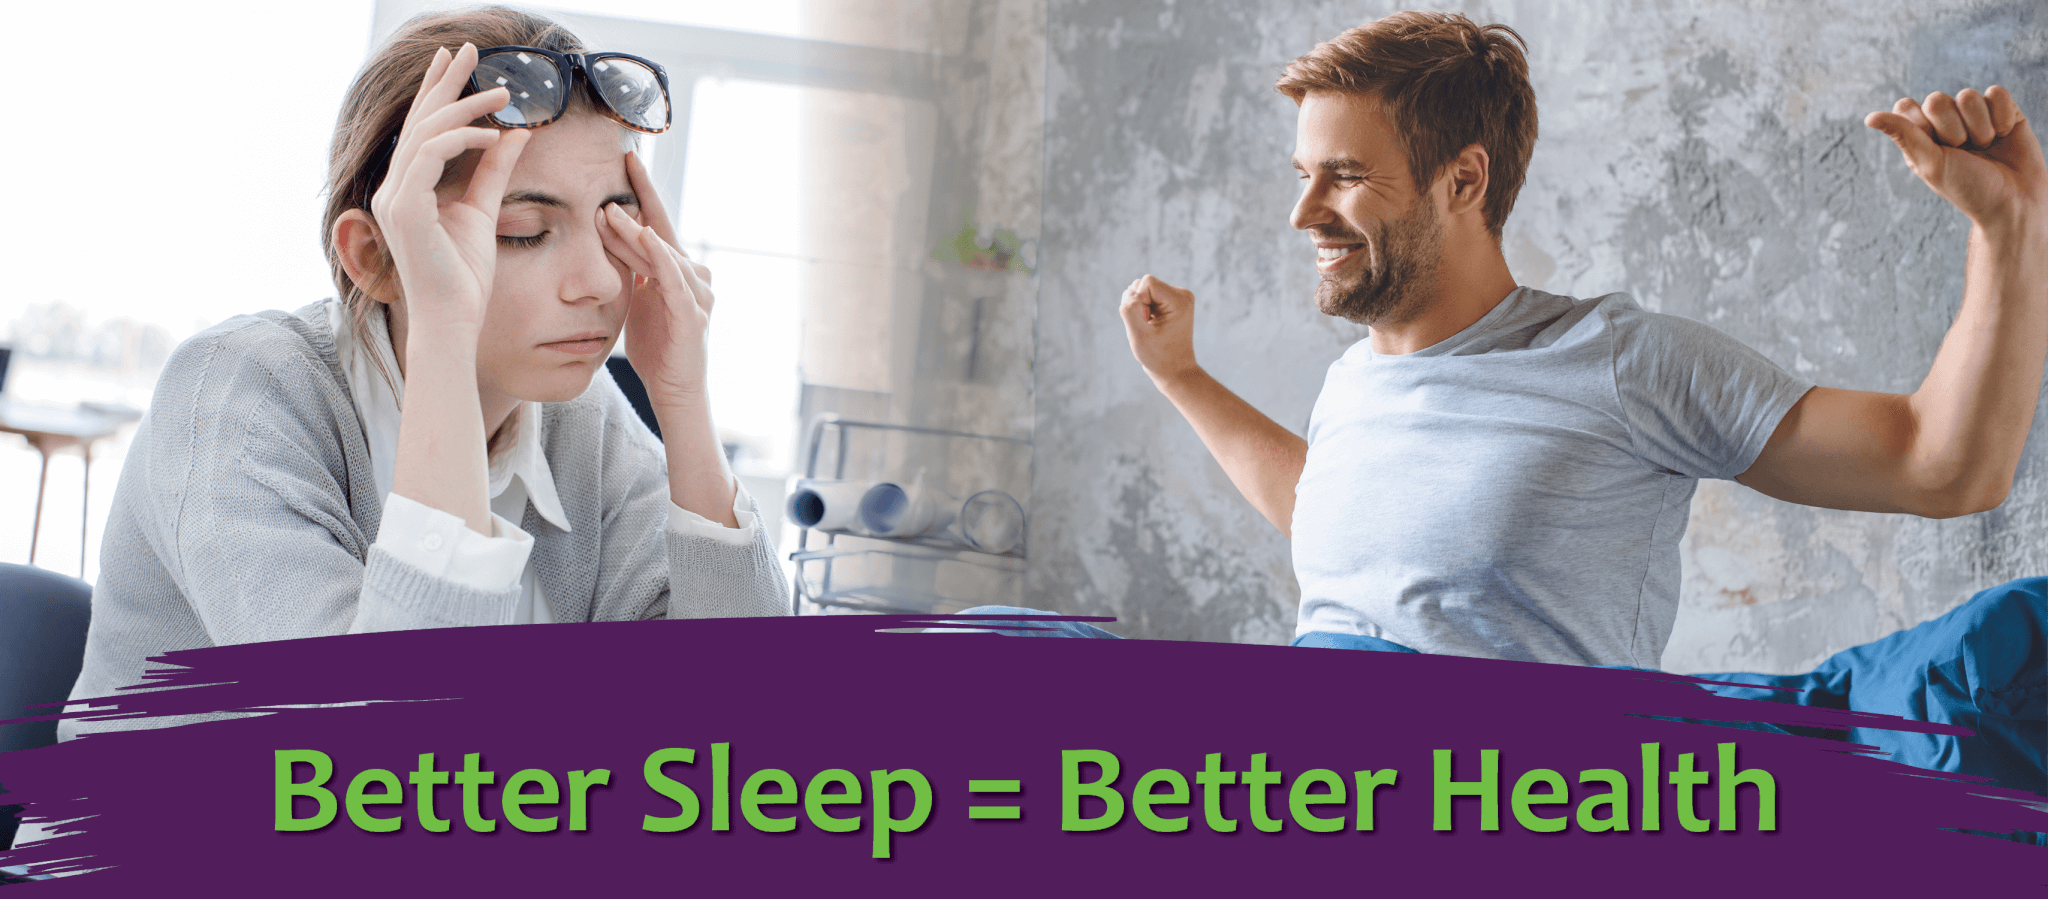 tired woman at work, well rested man waking up. Image text: Better Sleep = Better Health